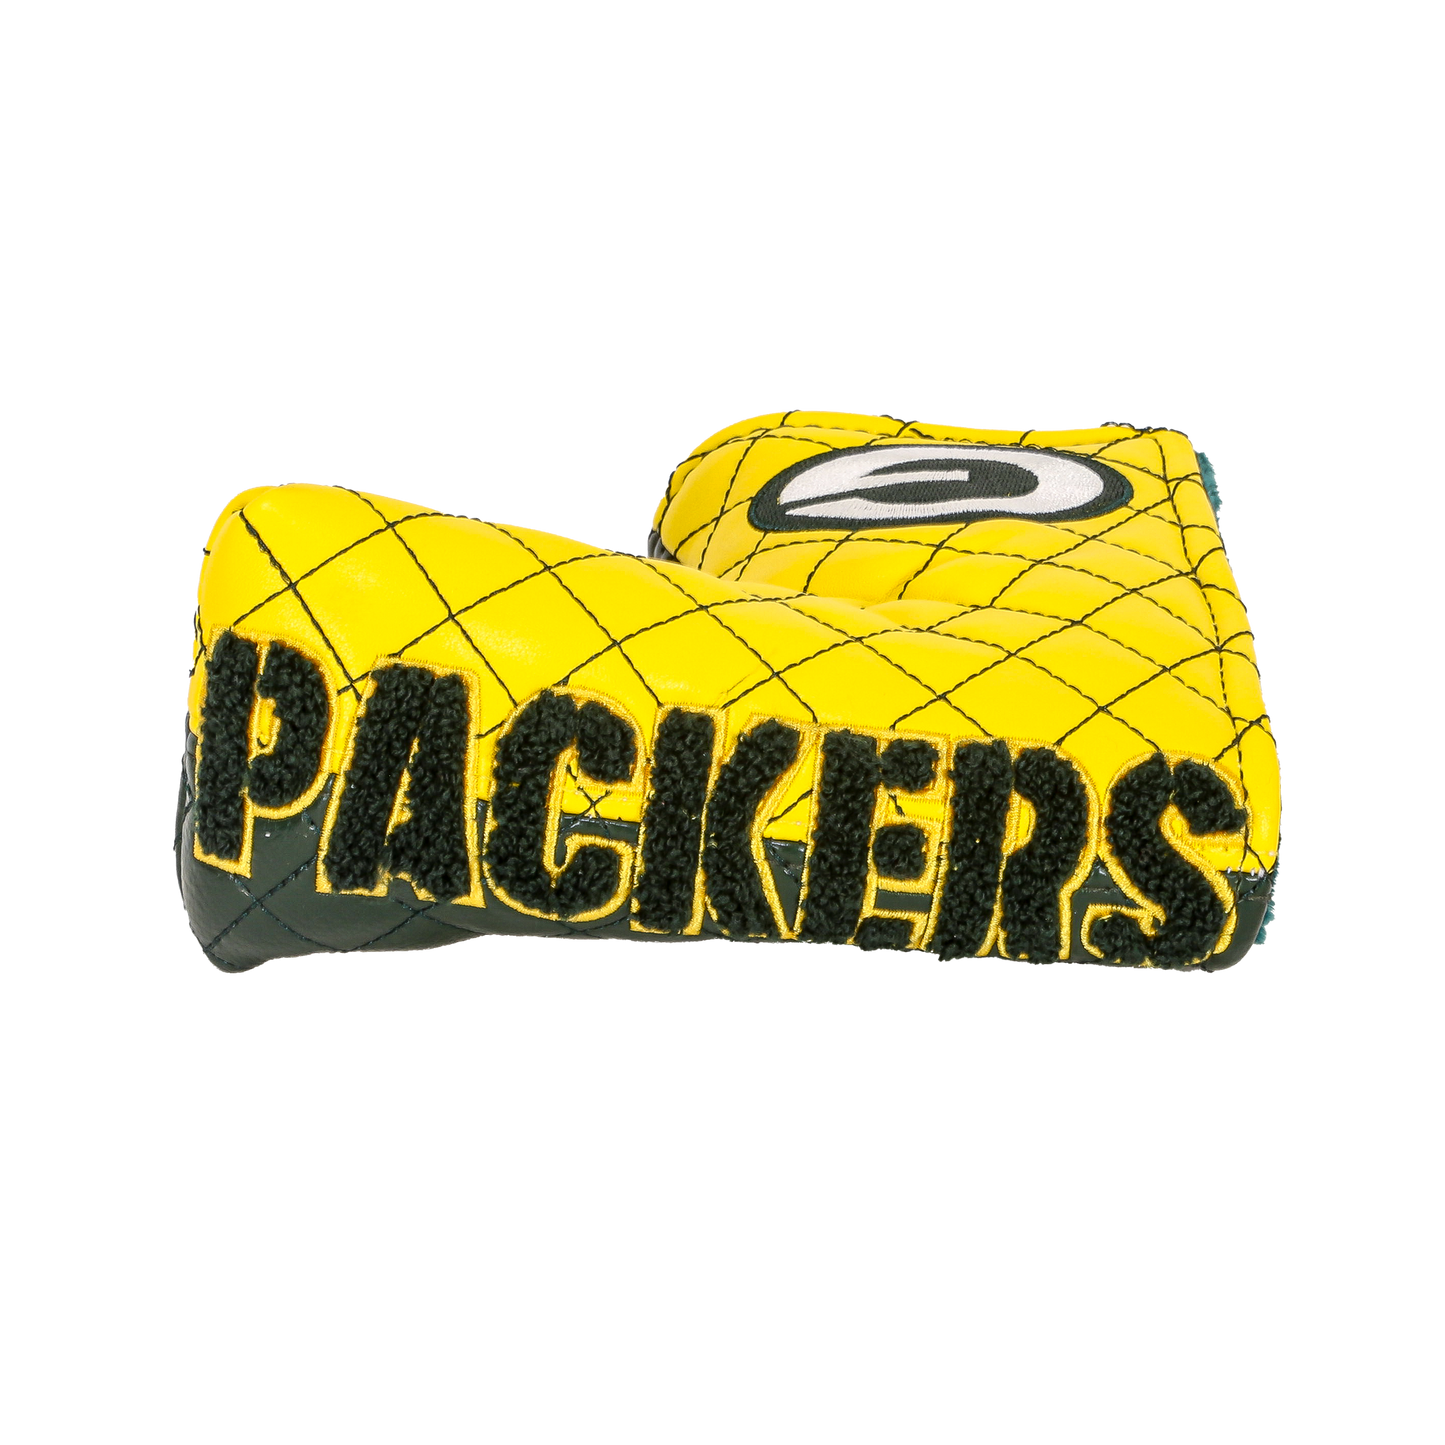 Green Bay "Packers" Blade Putter Cover